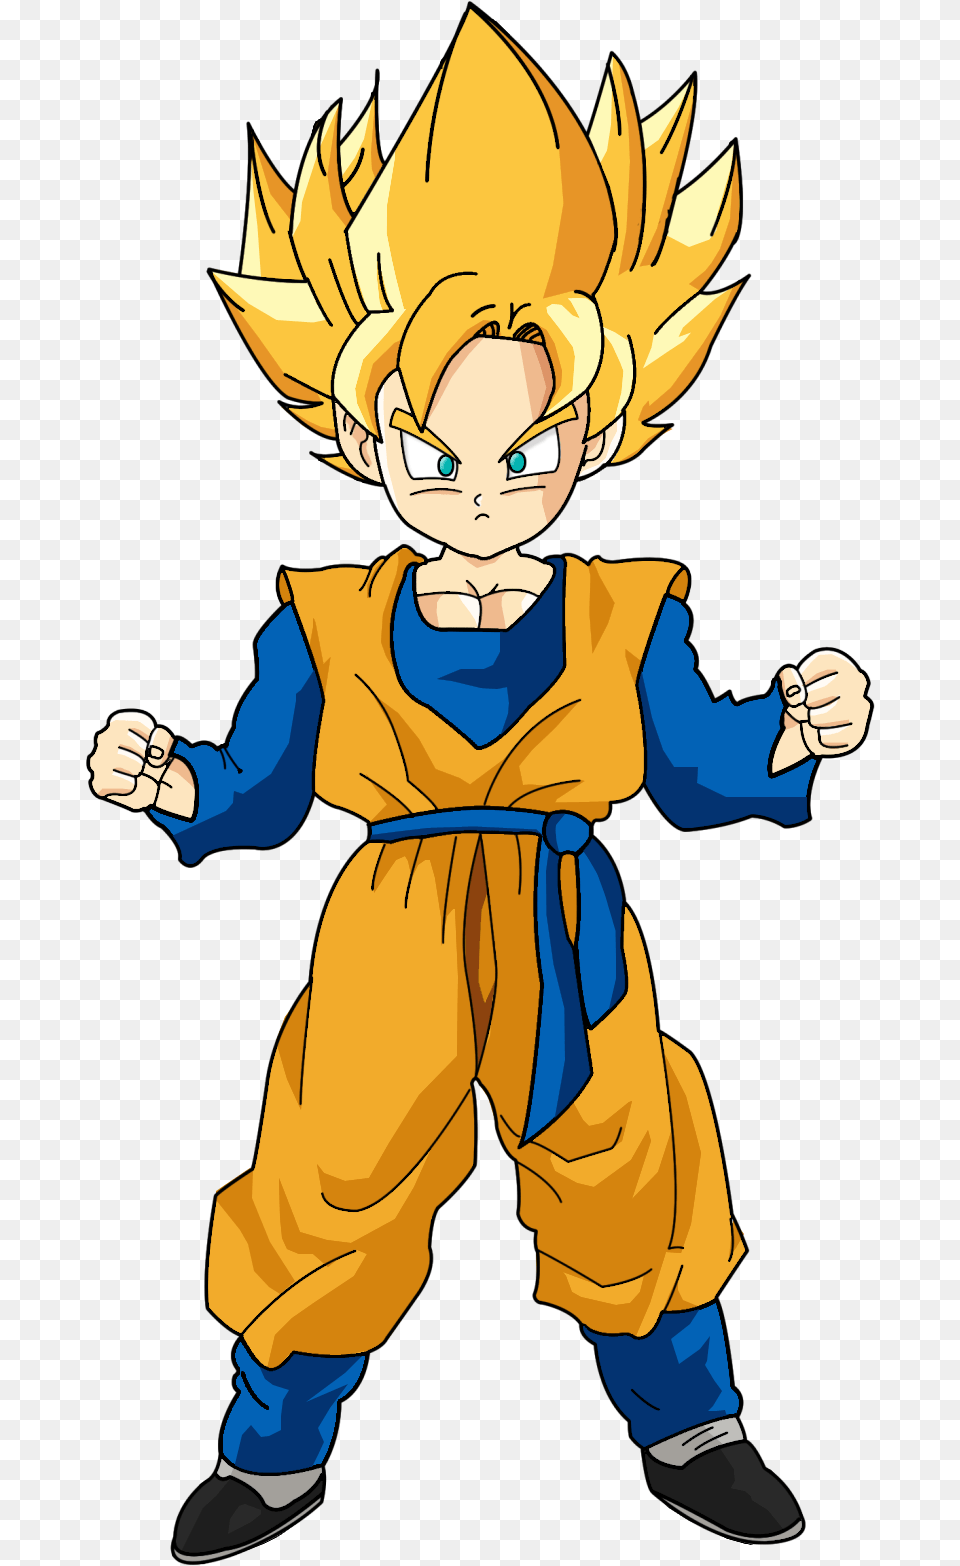 Hi This Is Goten Ssj And I Like How They Resembled Dragon Ball Z Goten Ssj, Book, Comics, Publication, Baby Free Png